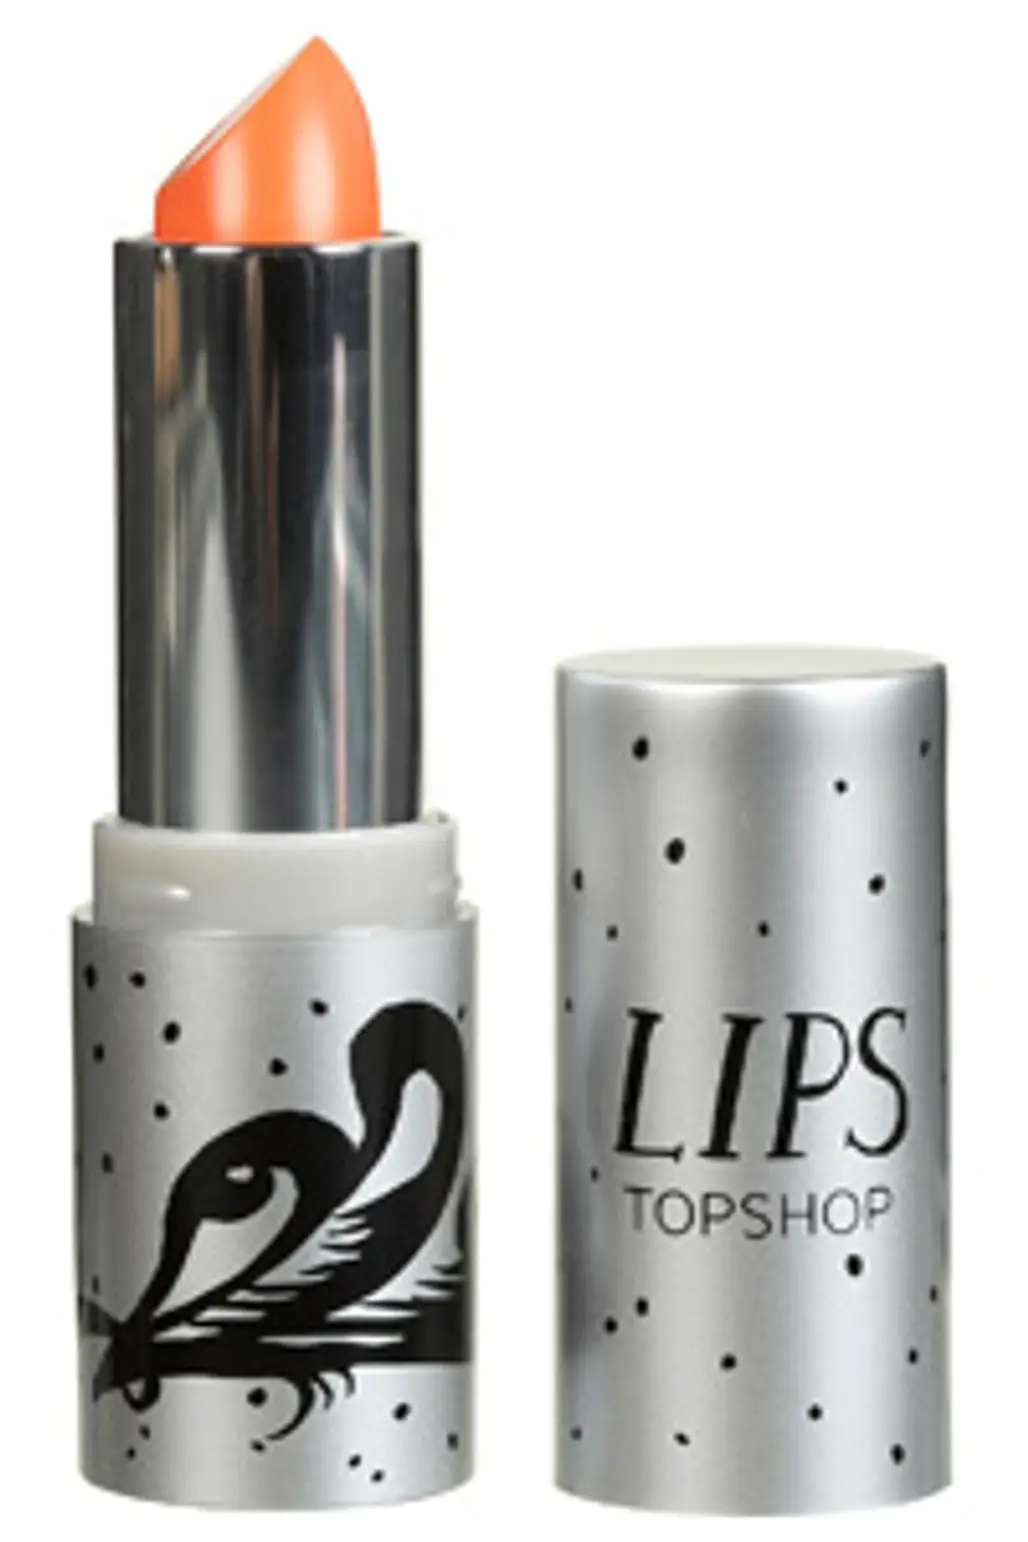 Topshop Lipstick in ‘Charmed’